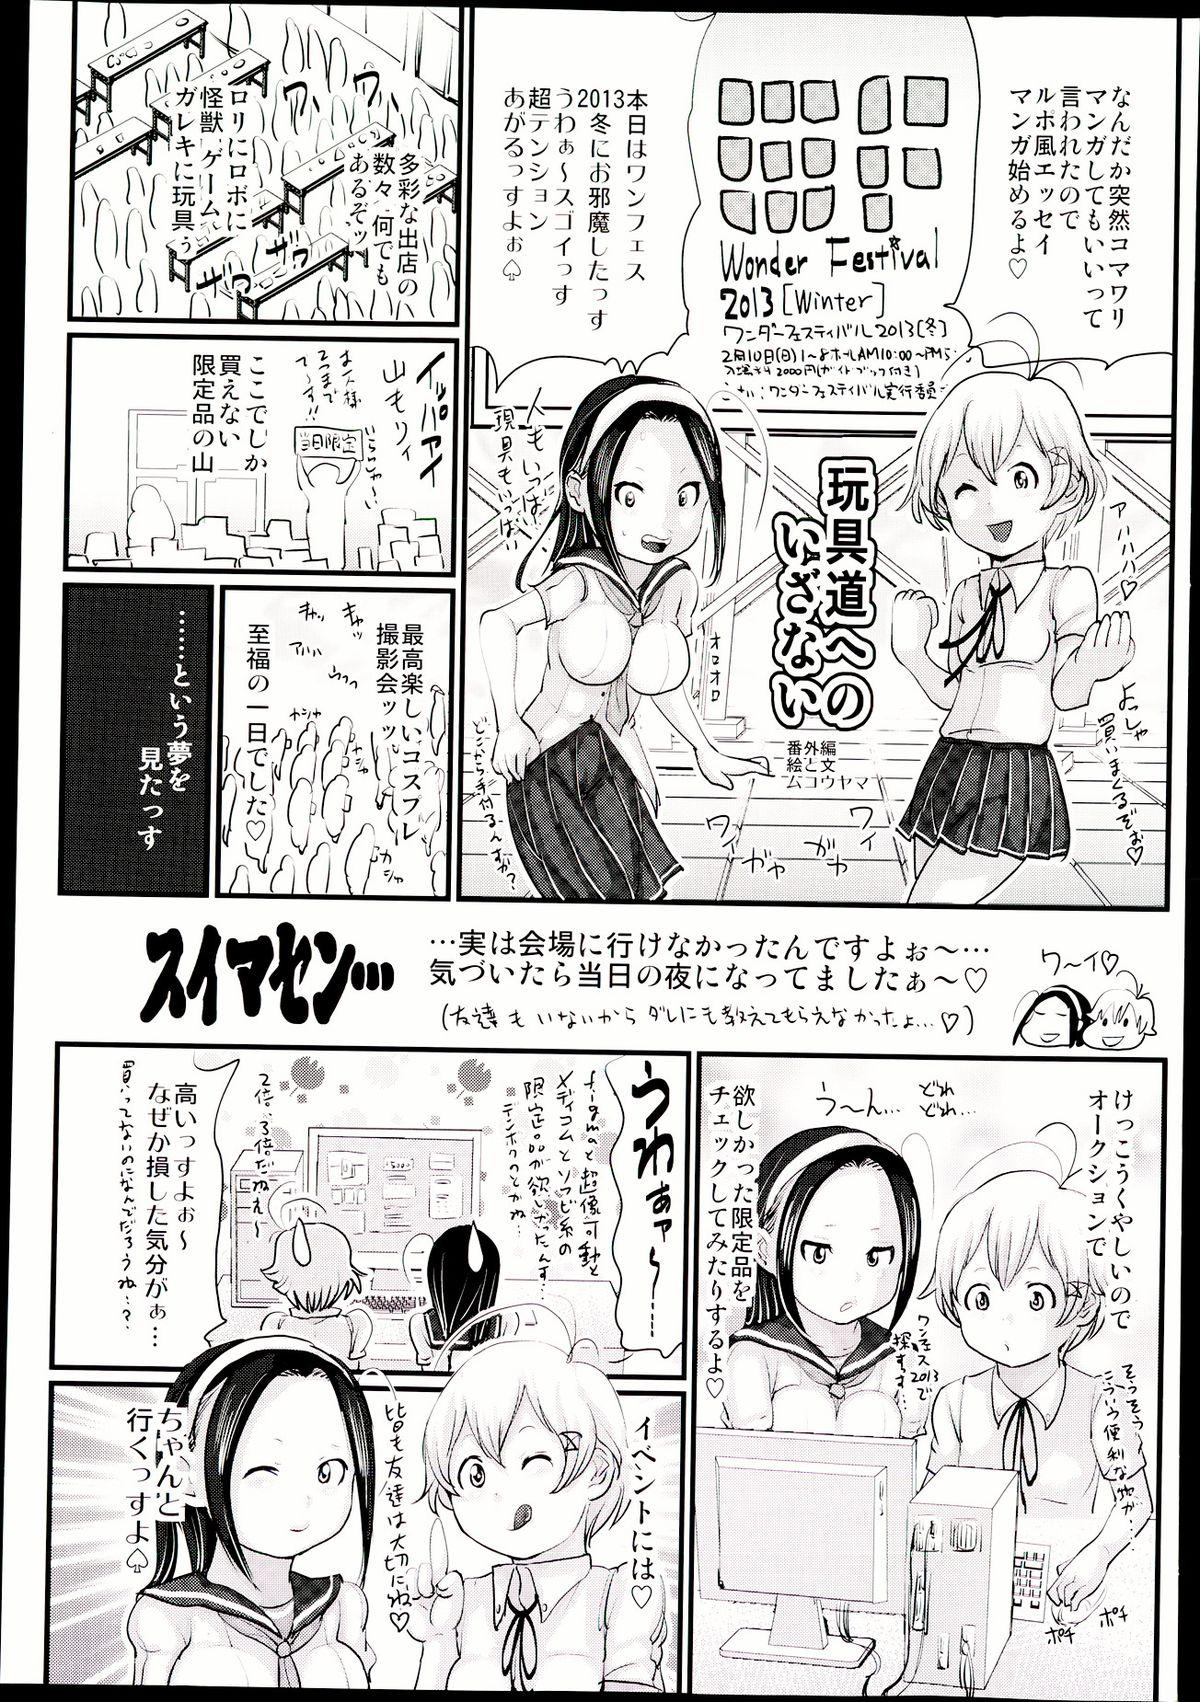 Anale COMIC Maihime Musou Act. 05 2013-05 Redbone - Page 395